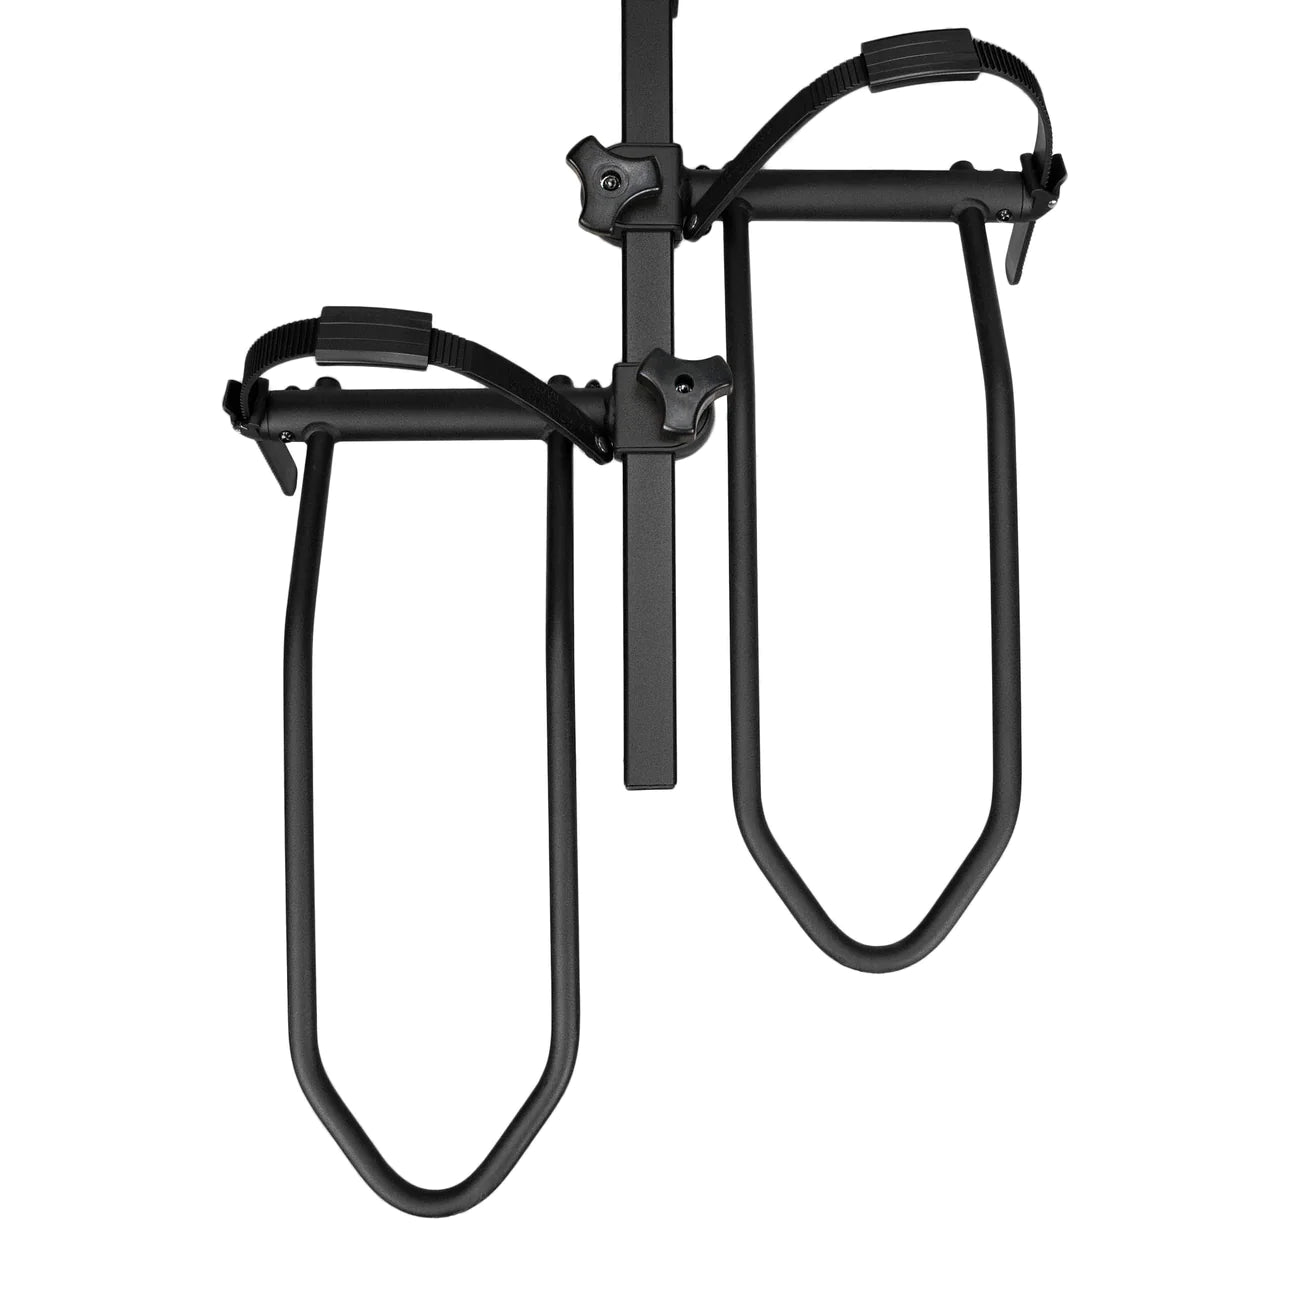 Hollywood Racks Sport Rider For Regular and Fat Electric Bikes (2" & 1-1/4") - HR1560